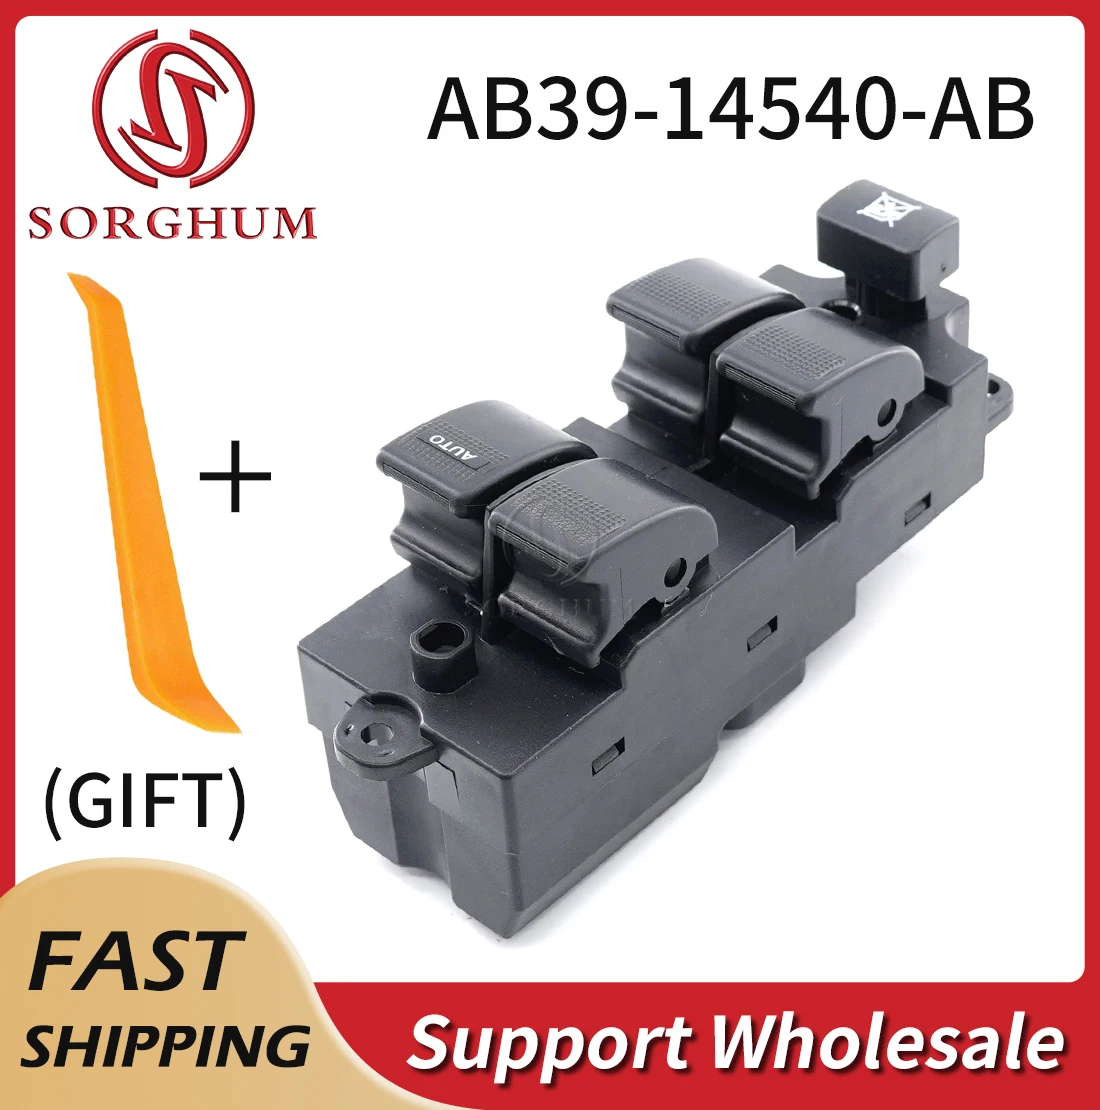 Sorghum AB39-14540-AB Auto RHD Right Side Power Window Switch For Ford Ranger Everest For Mazda BT-50 4 Door 2012 2013 2014 2015